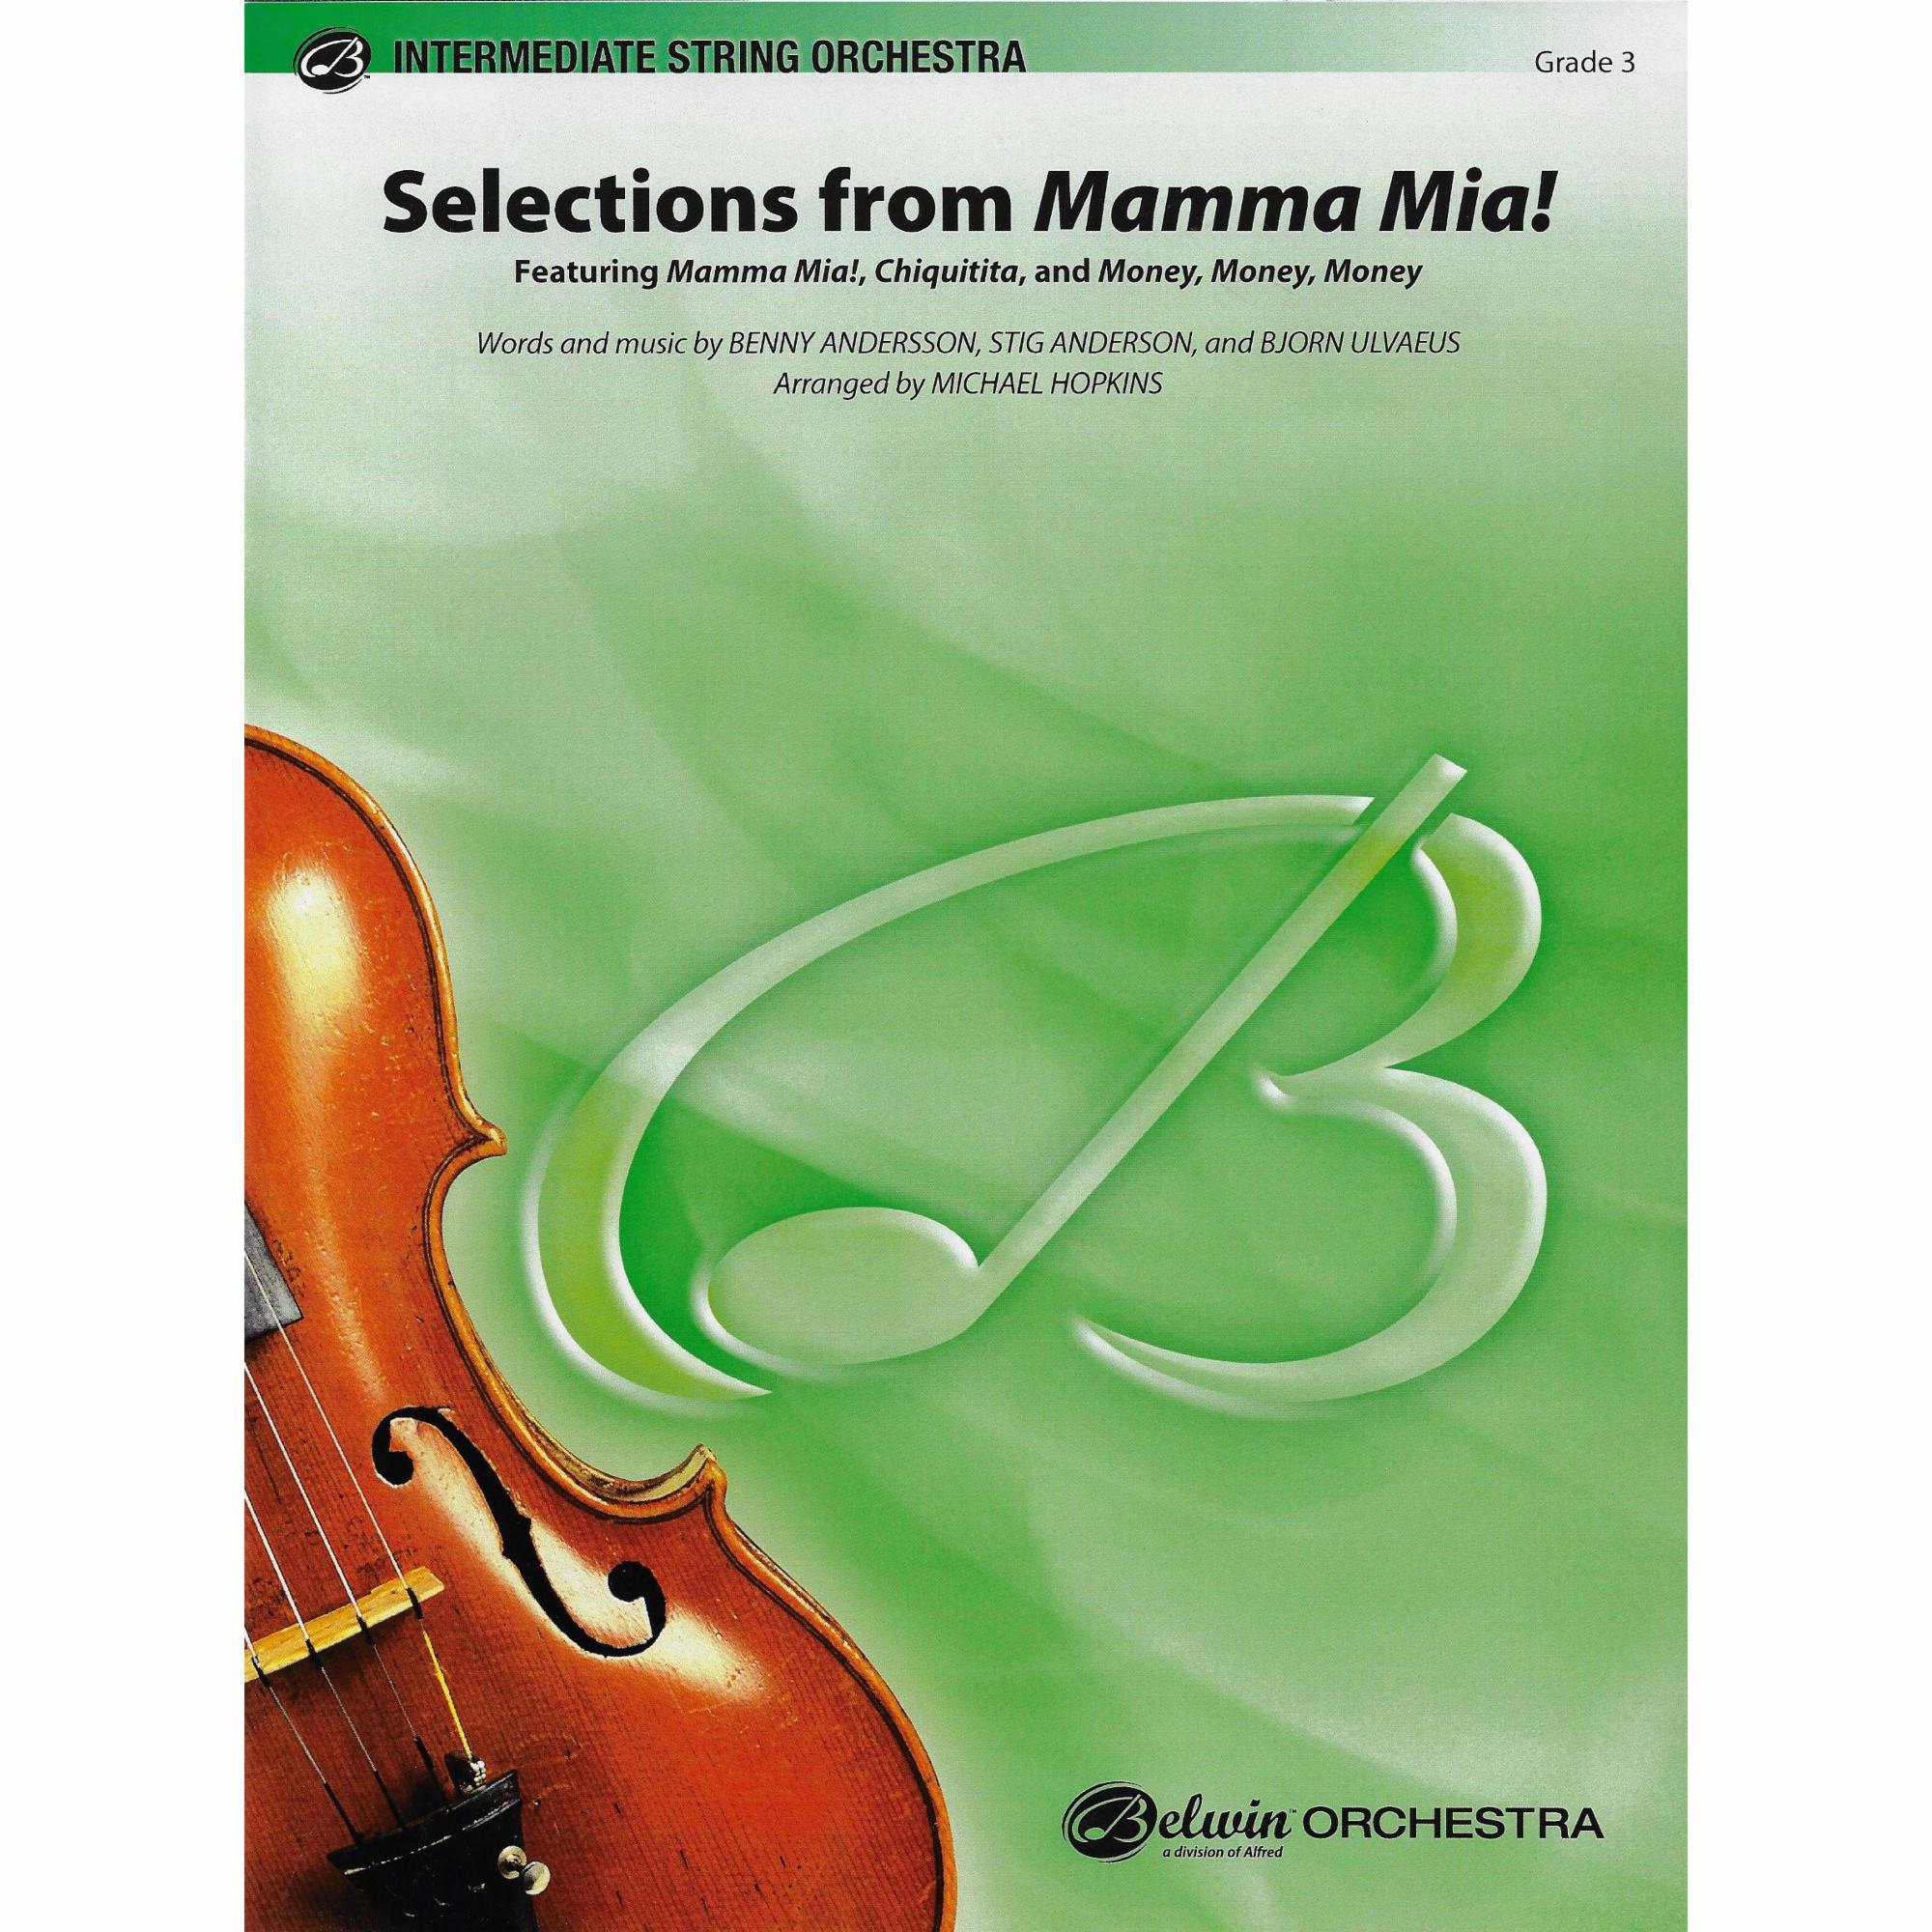 Selections from Mamma Mia! for String Orchestra